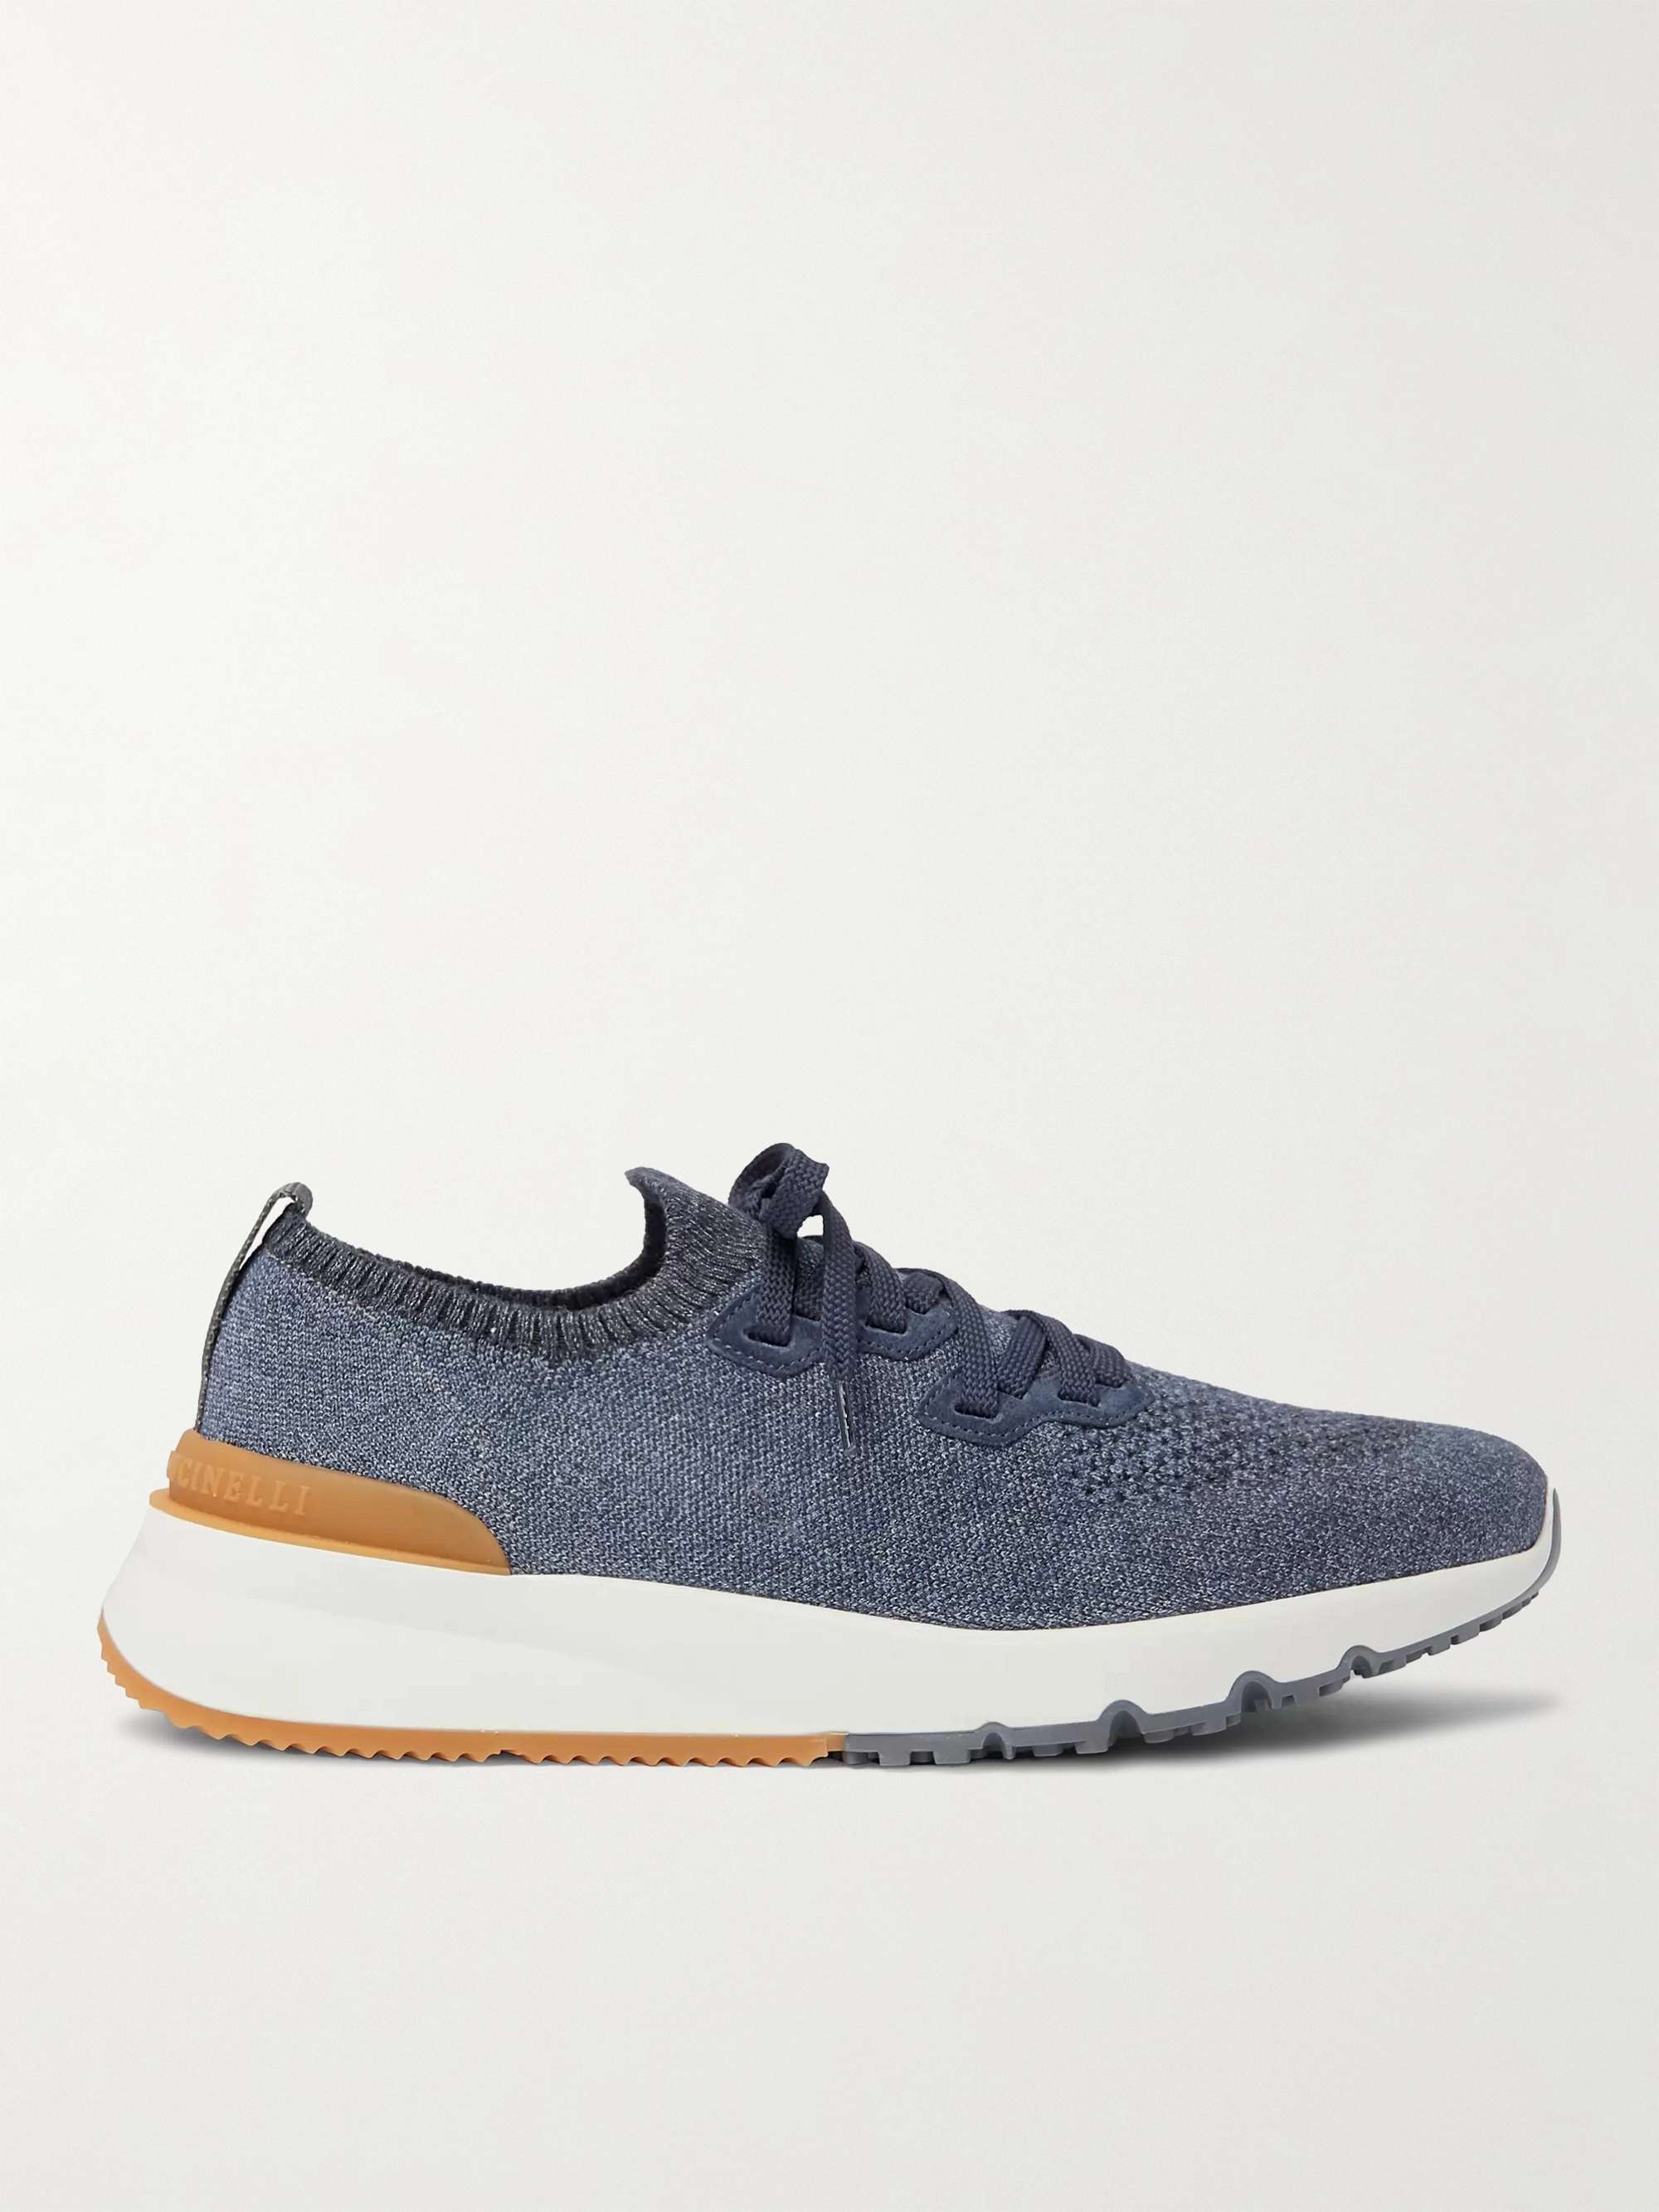 BRUNELLO CUCINELLI Suede-Trimmed Stretch-Knit Sneakers